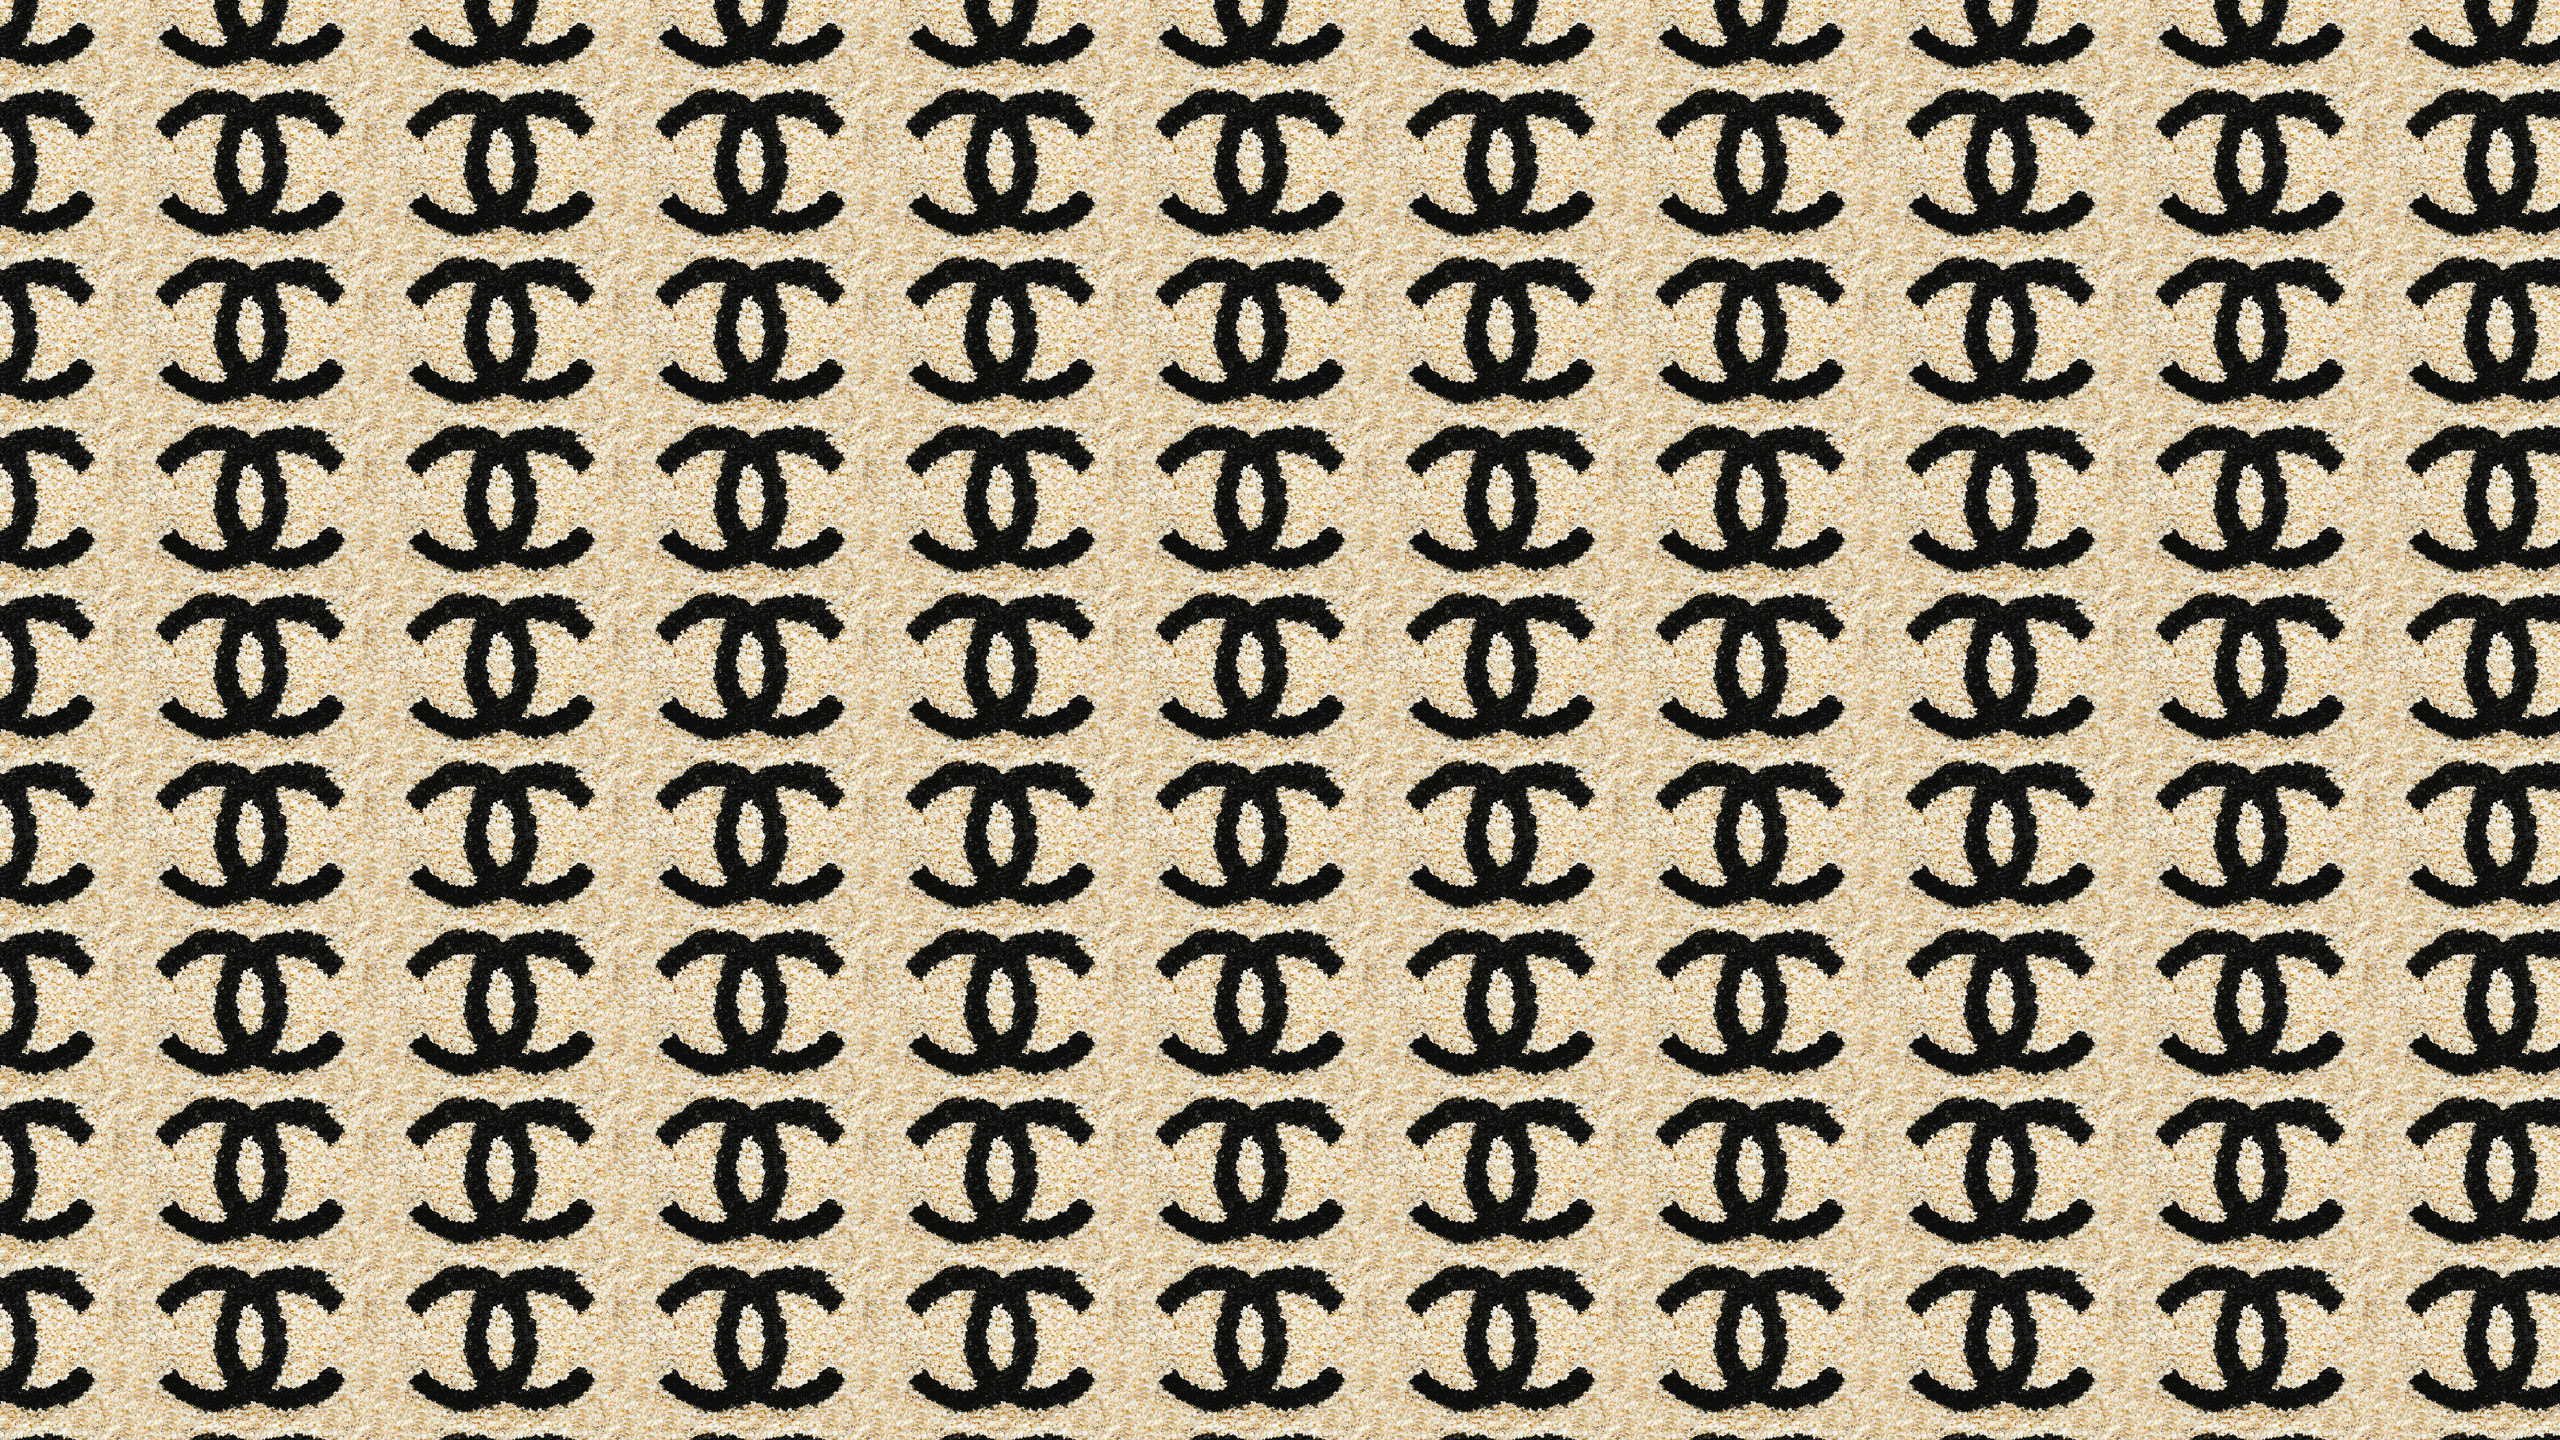 0f0f0f_chanel.png (2560×1440). Chanel wallpaper, Chanel stickers, Chanel background